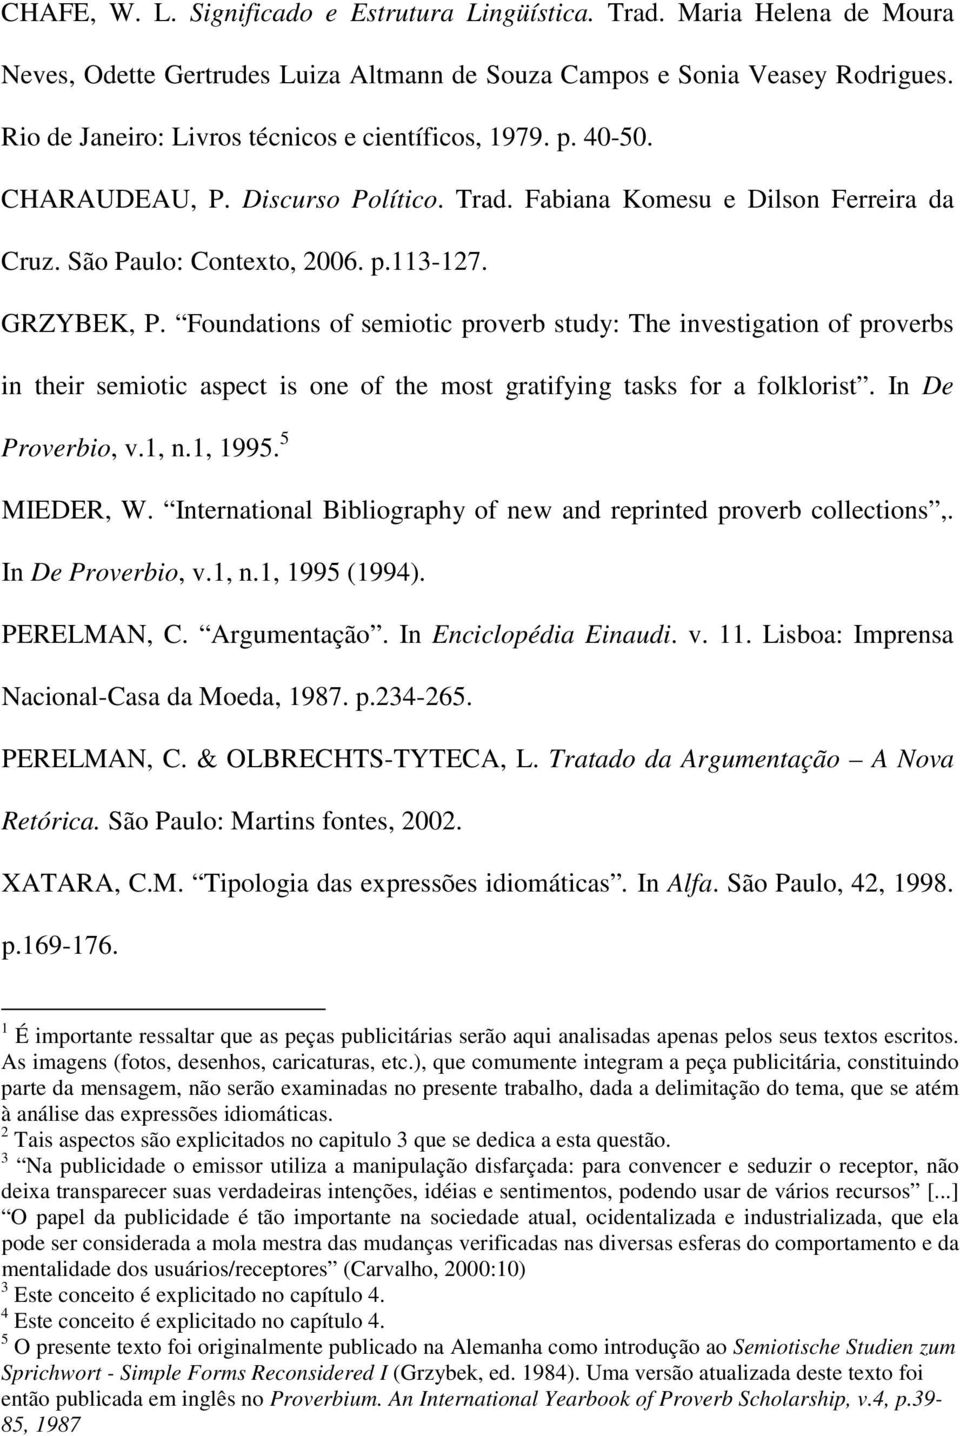 Foundations of semiotic proverb study: The investigation of proverbs in their semiotic aspect is one of the most gratifying tasks for a folklorist. In De Proverbio, v.1, n.1, 1995. 5 MIEDER, W.